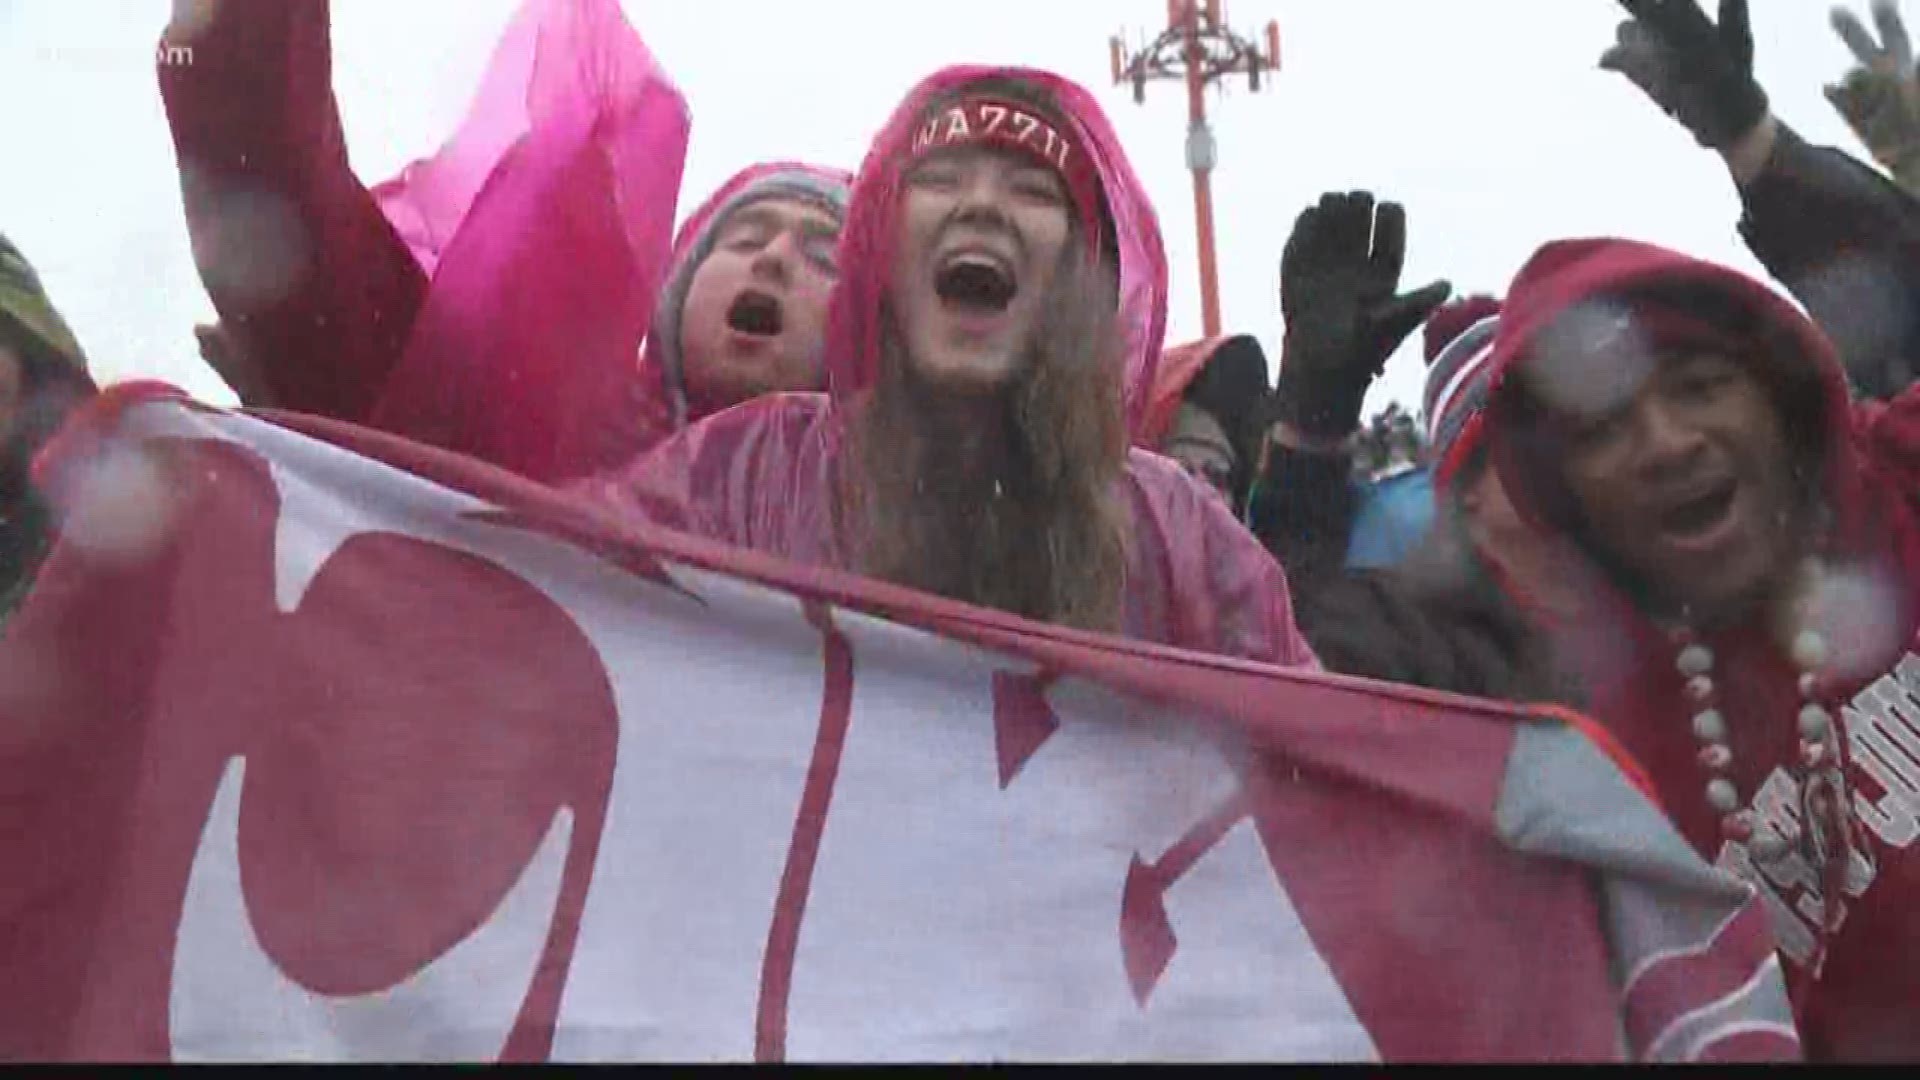 Pounds started the streak back in 2003, when he drove a homemade WSU flag 700 miles from his home in Albuquerque to Austin, Texas and waved it behind the set of College GameDay.